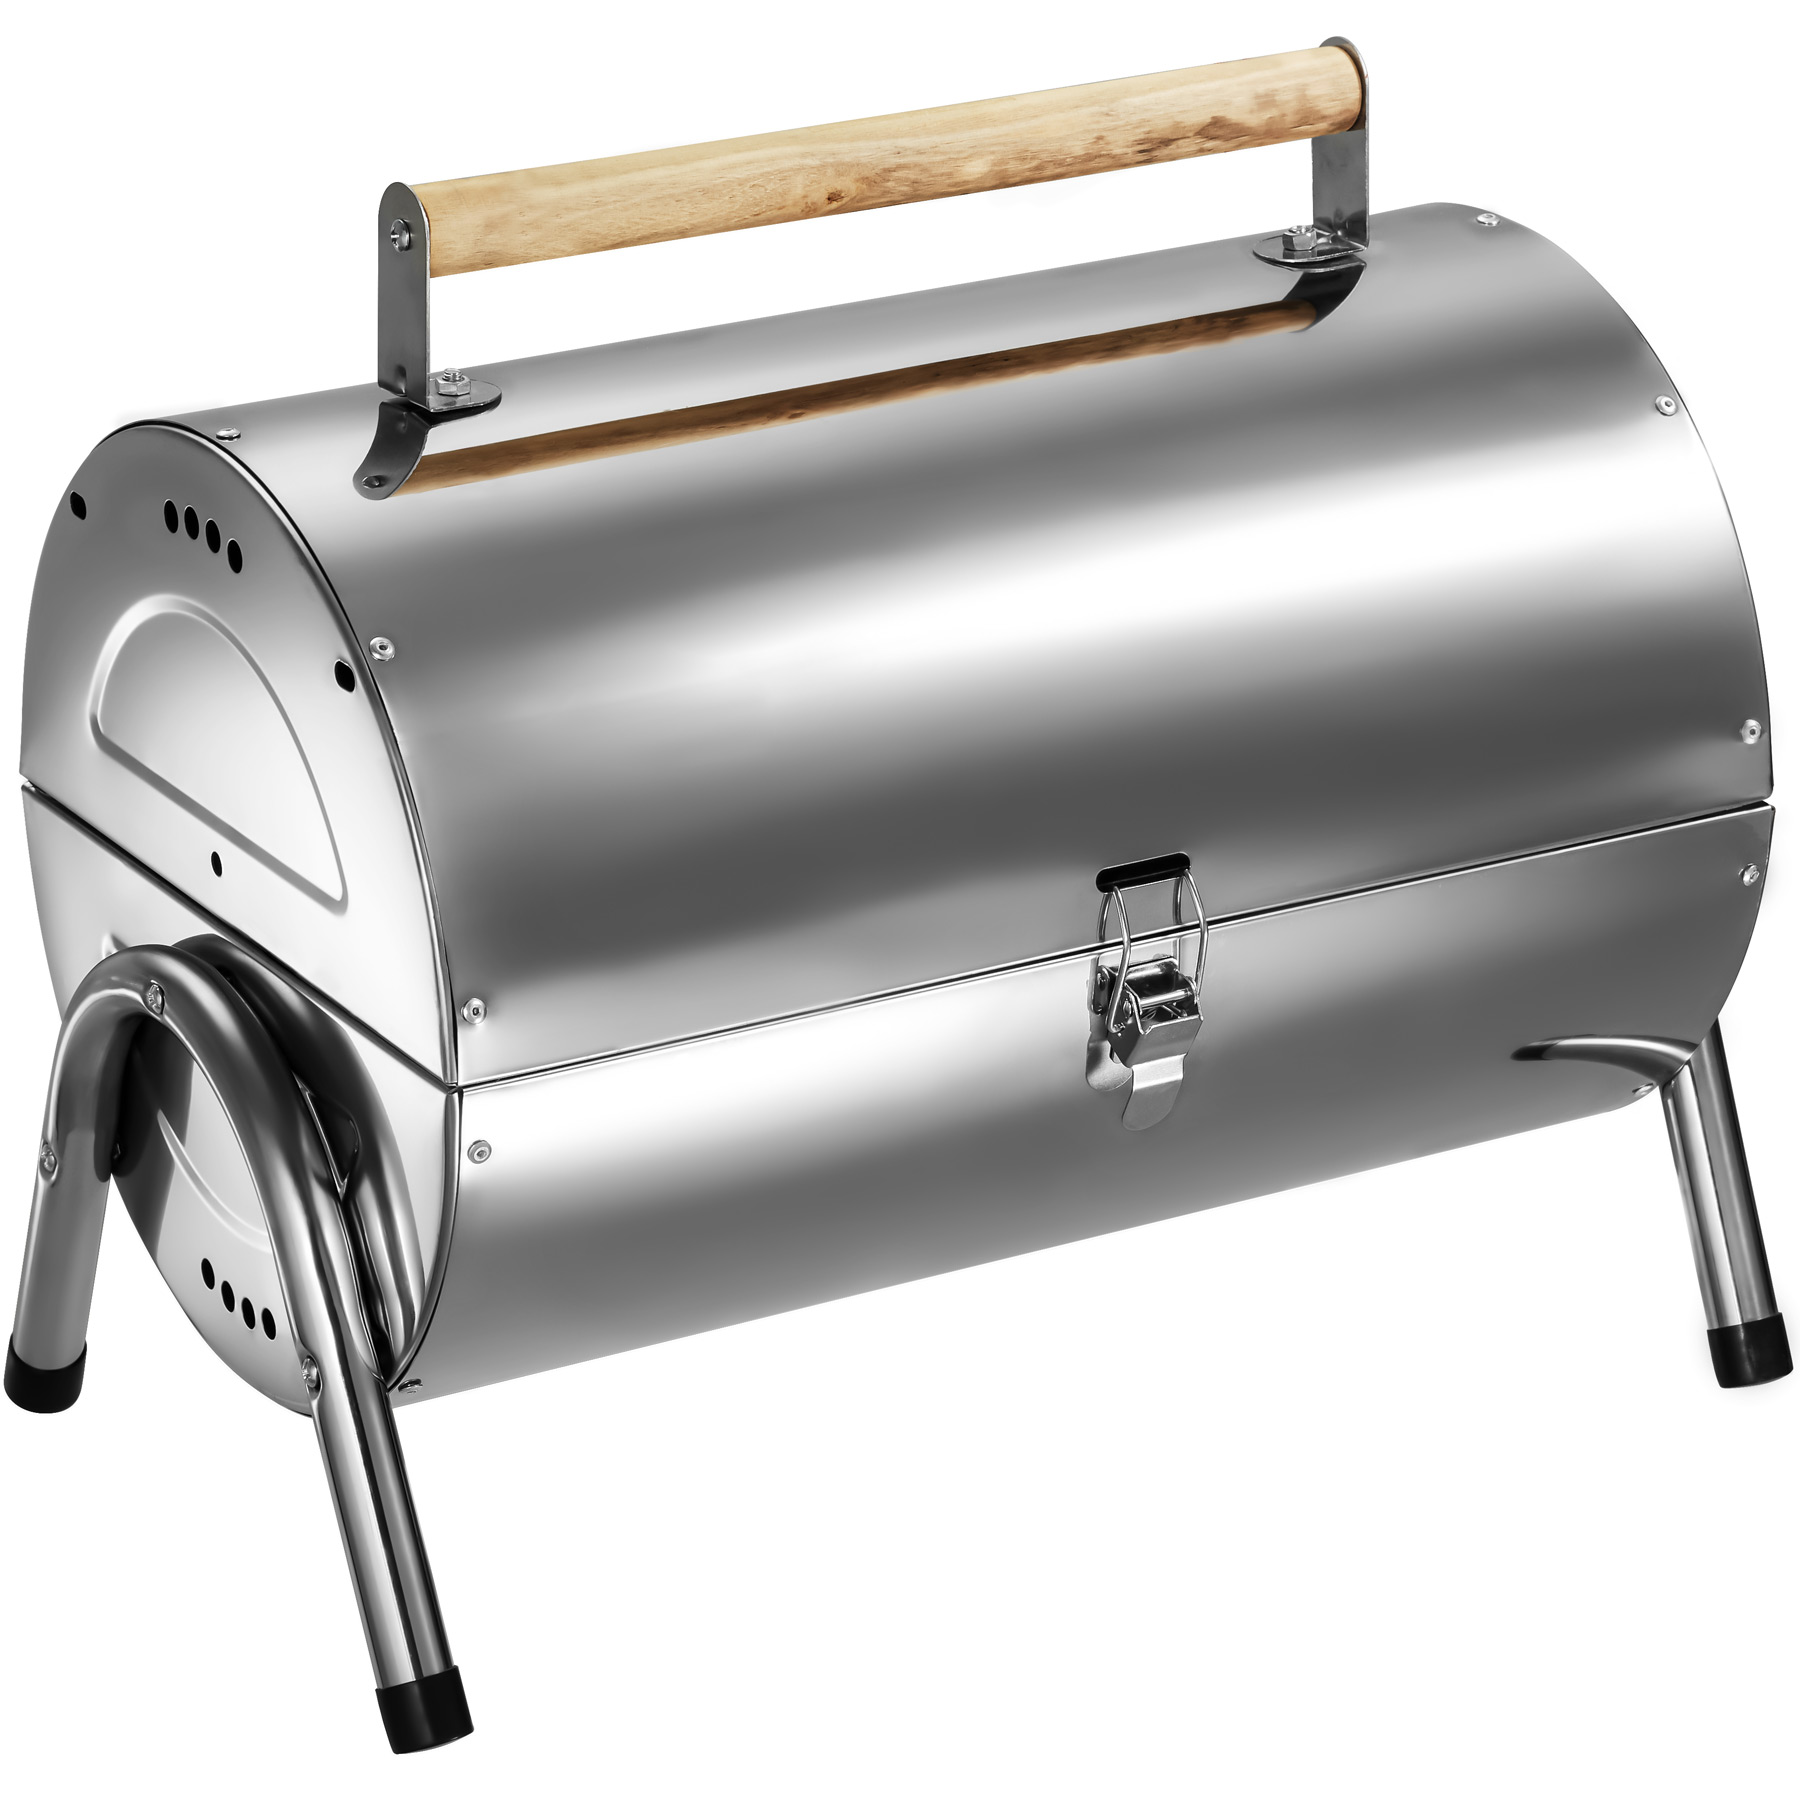 Barbecue portable argent